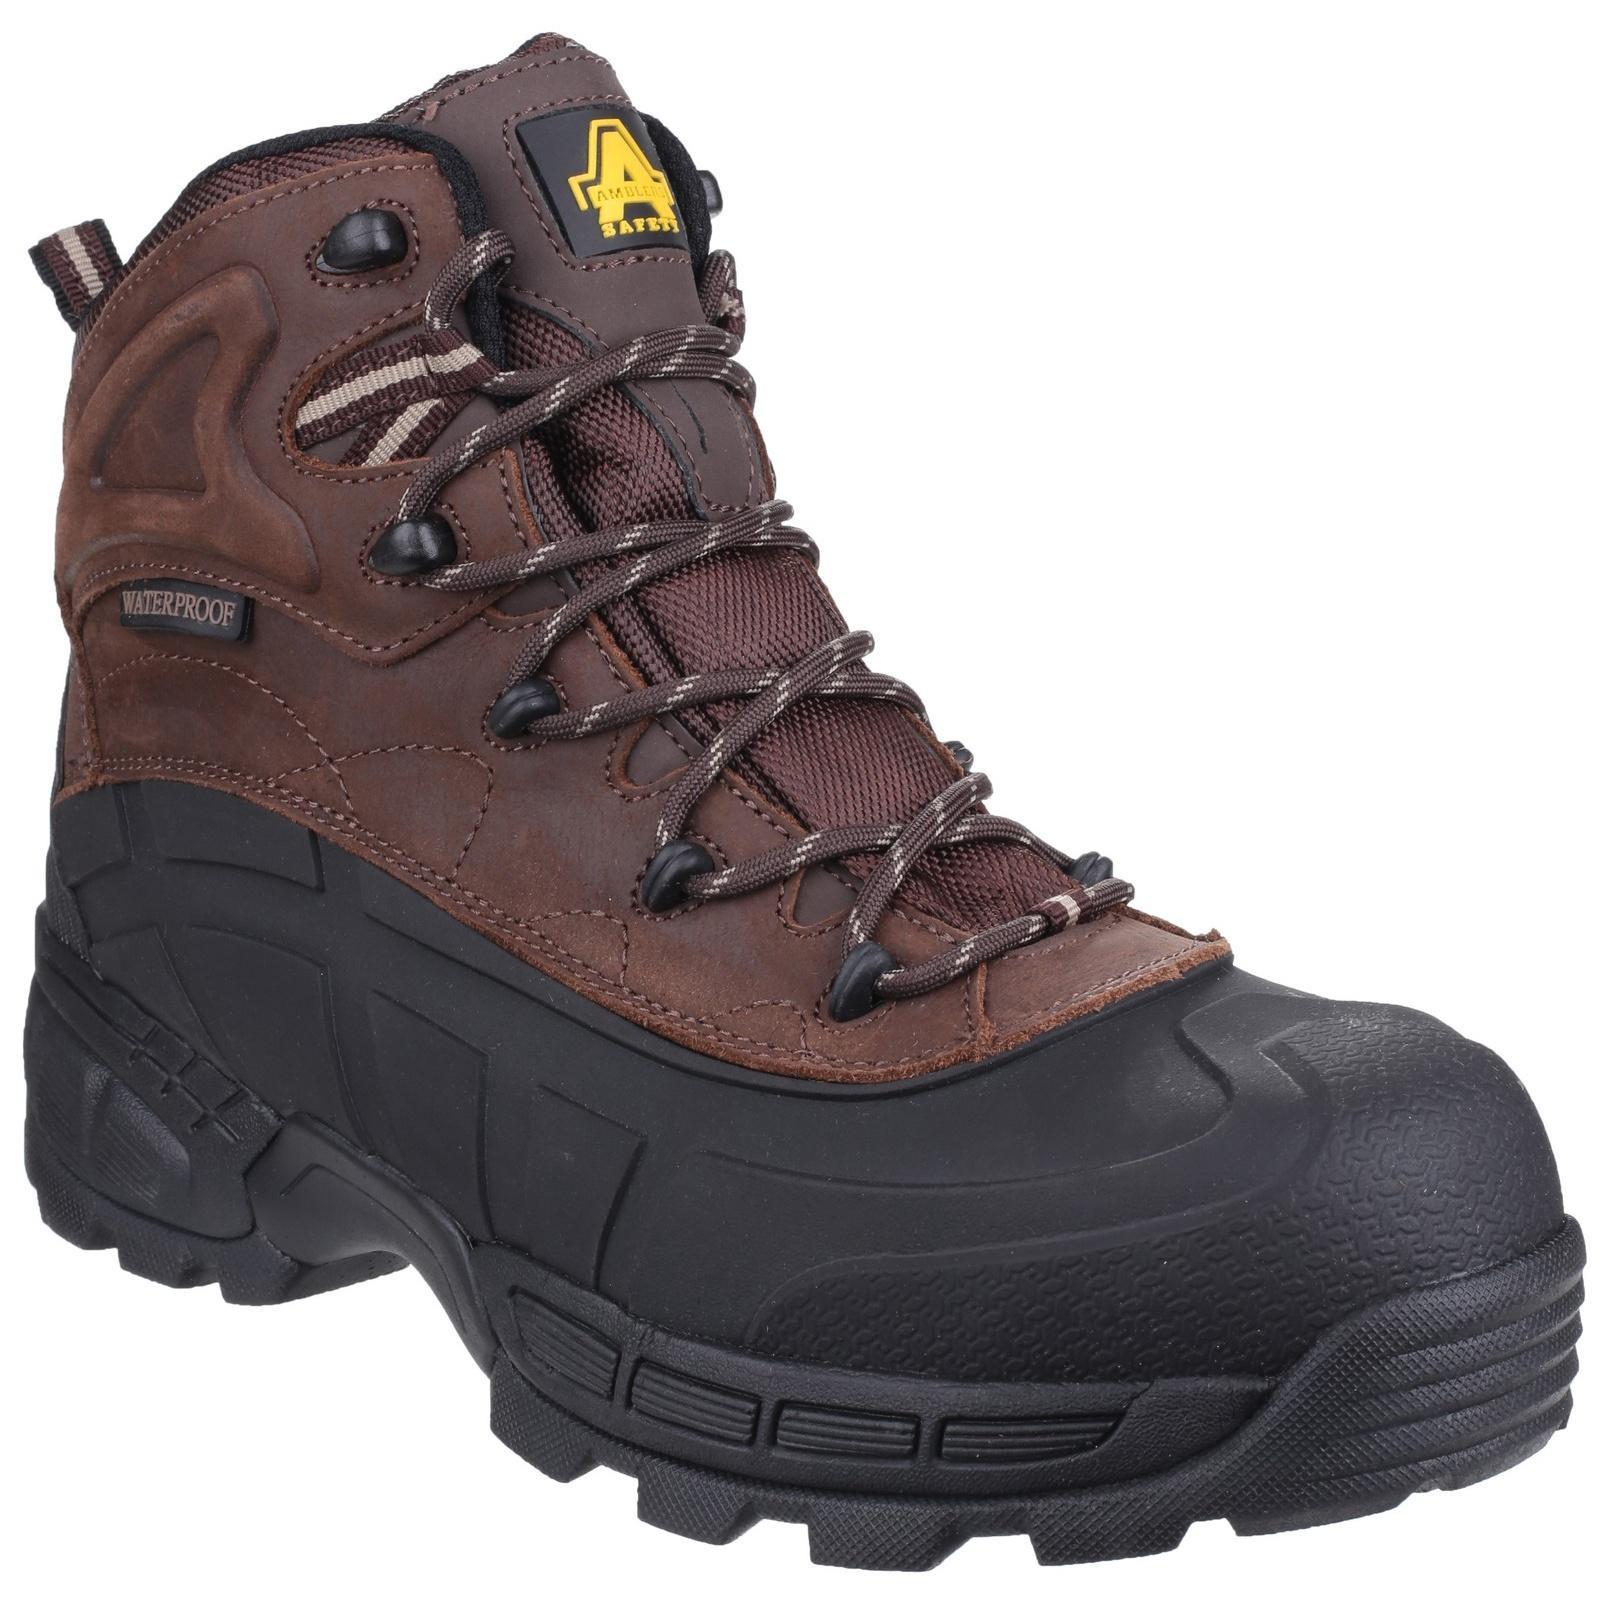 Amblers Mens FS430 Orca S3 Waterproof Leather Safety Boots (Brown) (13 UK)